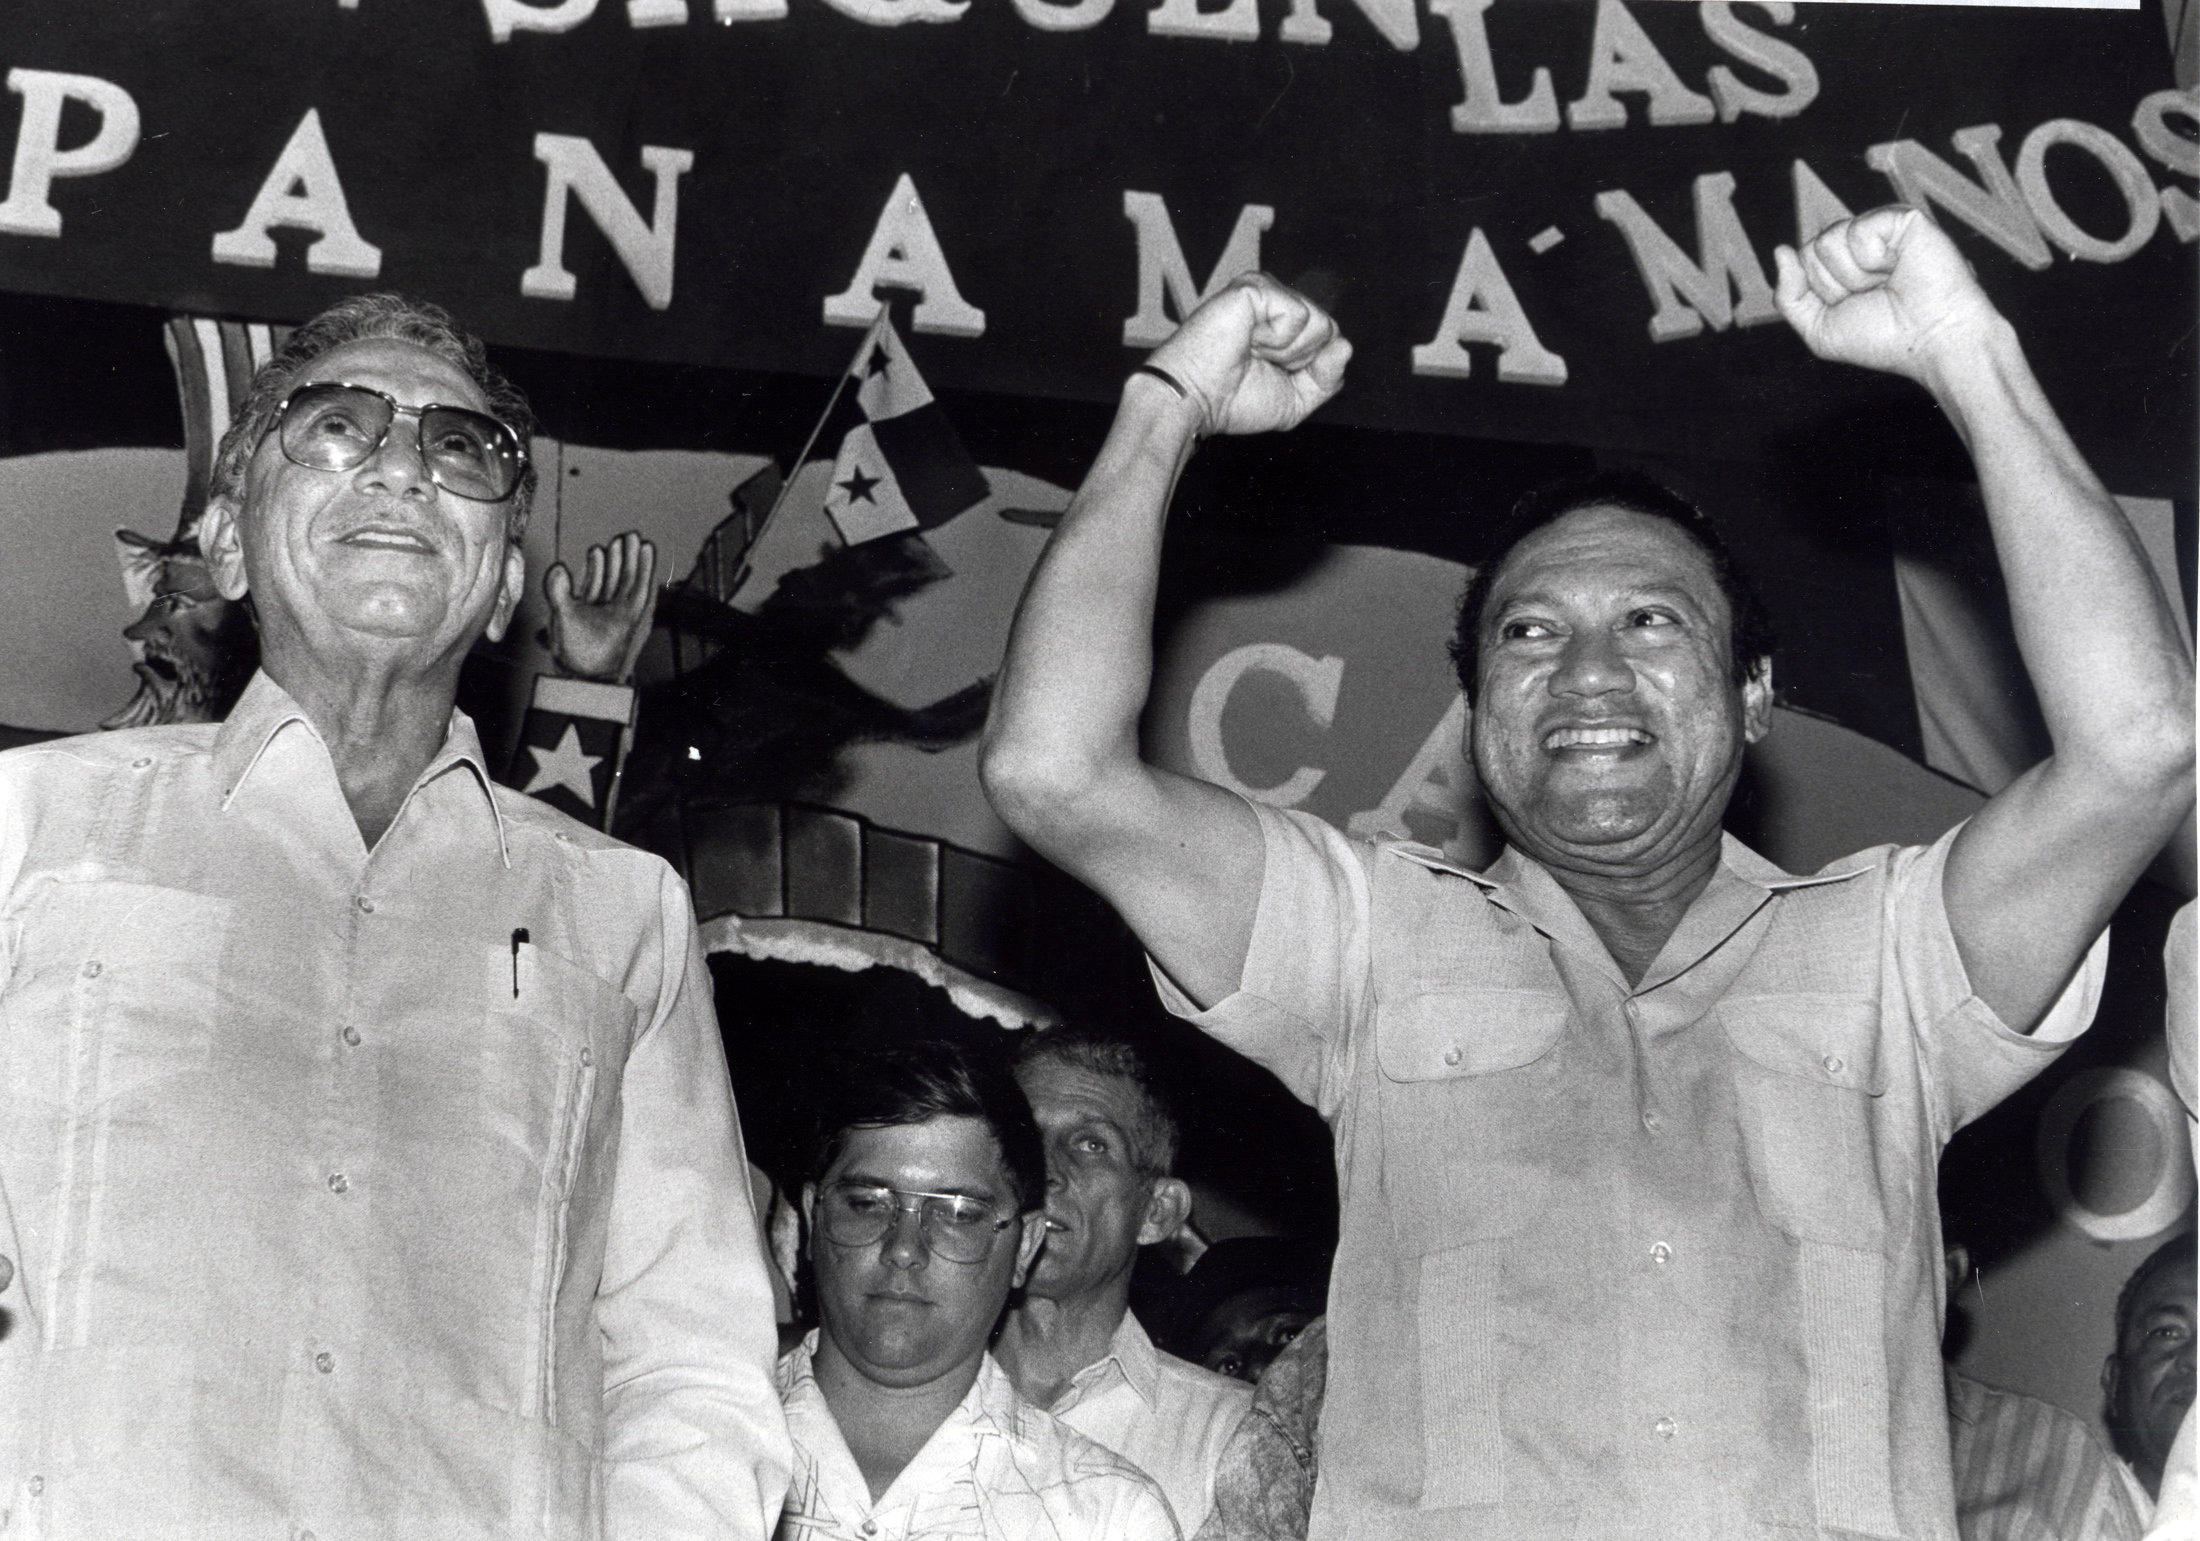 Ex-Panamanian dictator Noriega, ousted in U.S. invasion, dies at 83